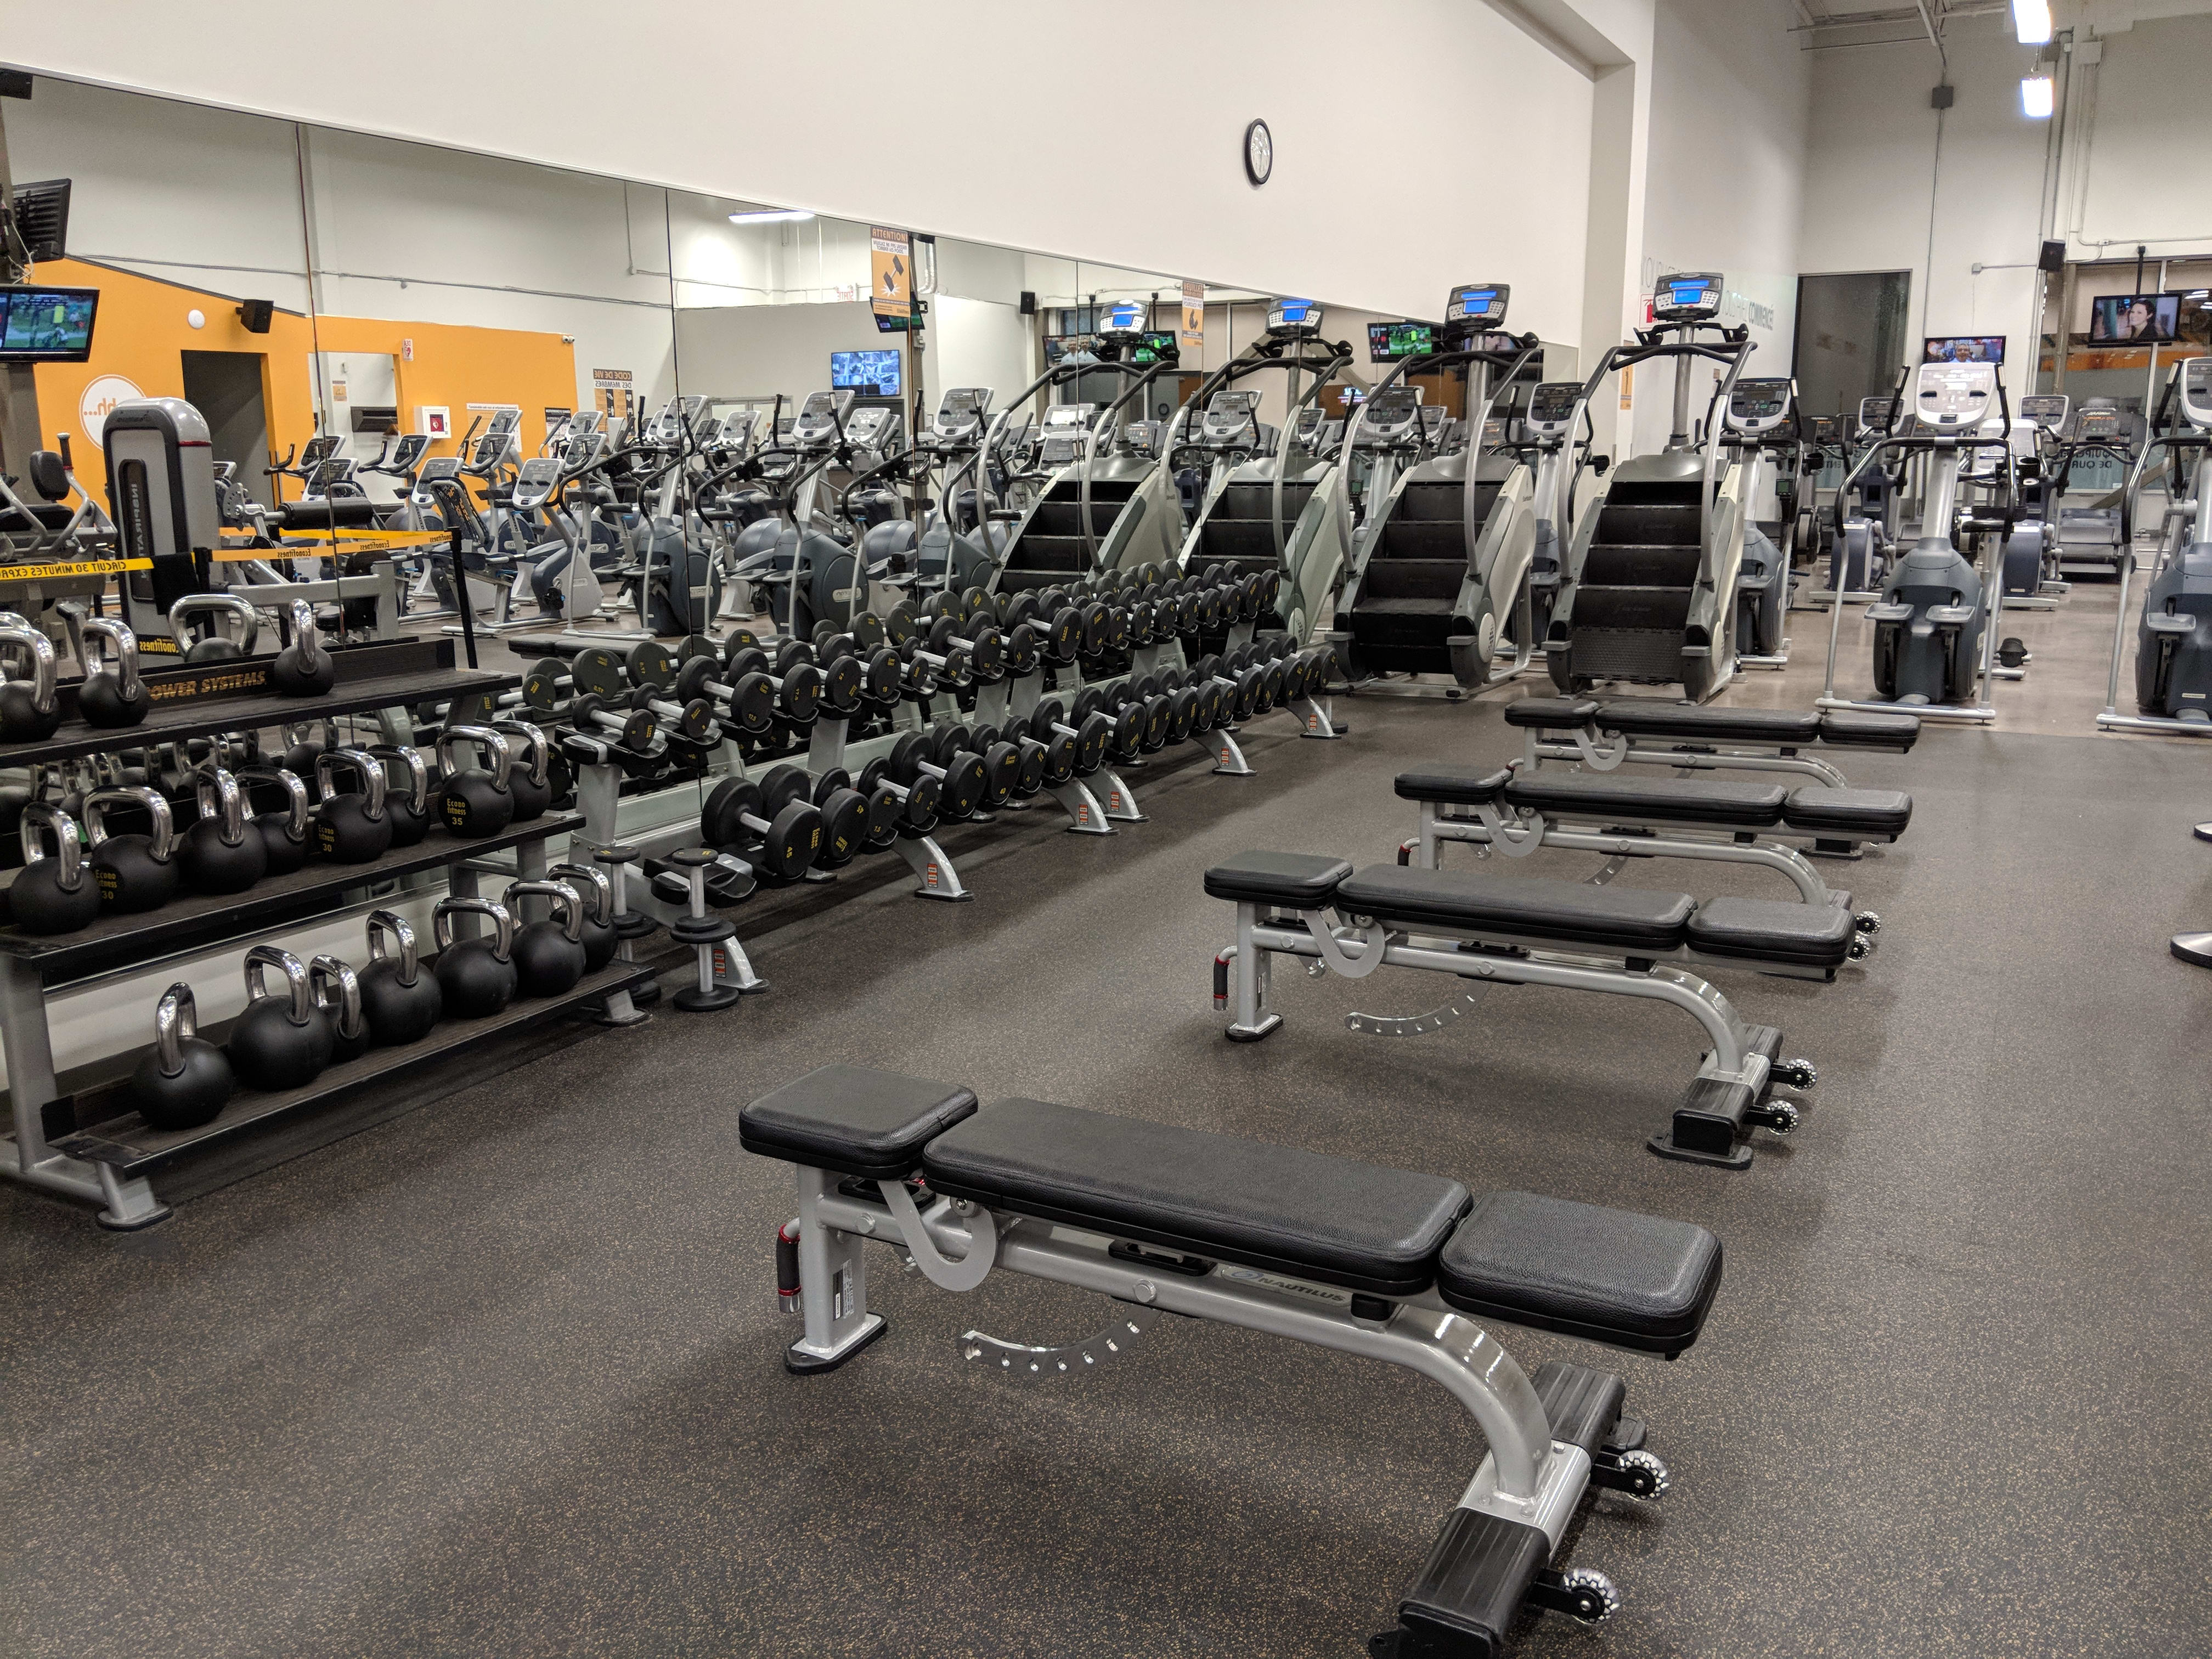 1. Save on Gym Memberships with Econofitness Coupons
2. Get a Discount on Your First Month at Econofitness with a Coupon Code
3. Find the Best Deals on Gym Memberships with Econofitness Coupons
4. Save Big on Gym Memberships with Econofitness Promo Codes
5. Get a Free Trial at Econofitness with a Coupon
6. Find the Best Deals on Gym Memberships with Econofitness Discounts
7. Save on Your Gym Membership with Econofitness Coupon Codes
8. Get a Discount on Your Econofitness Membership with a Coupon
9. Find the Best Deals on Gym Memberships with Econofitness Special Offers
10. Save on Your Gym Membership with Econofitness Deals and Coupons - wide 1